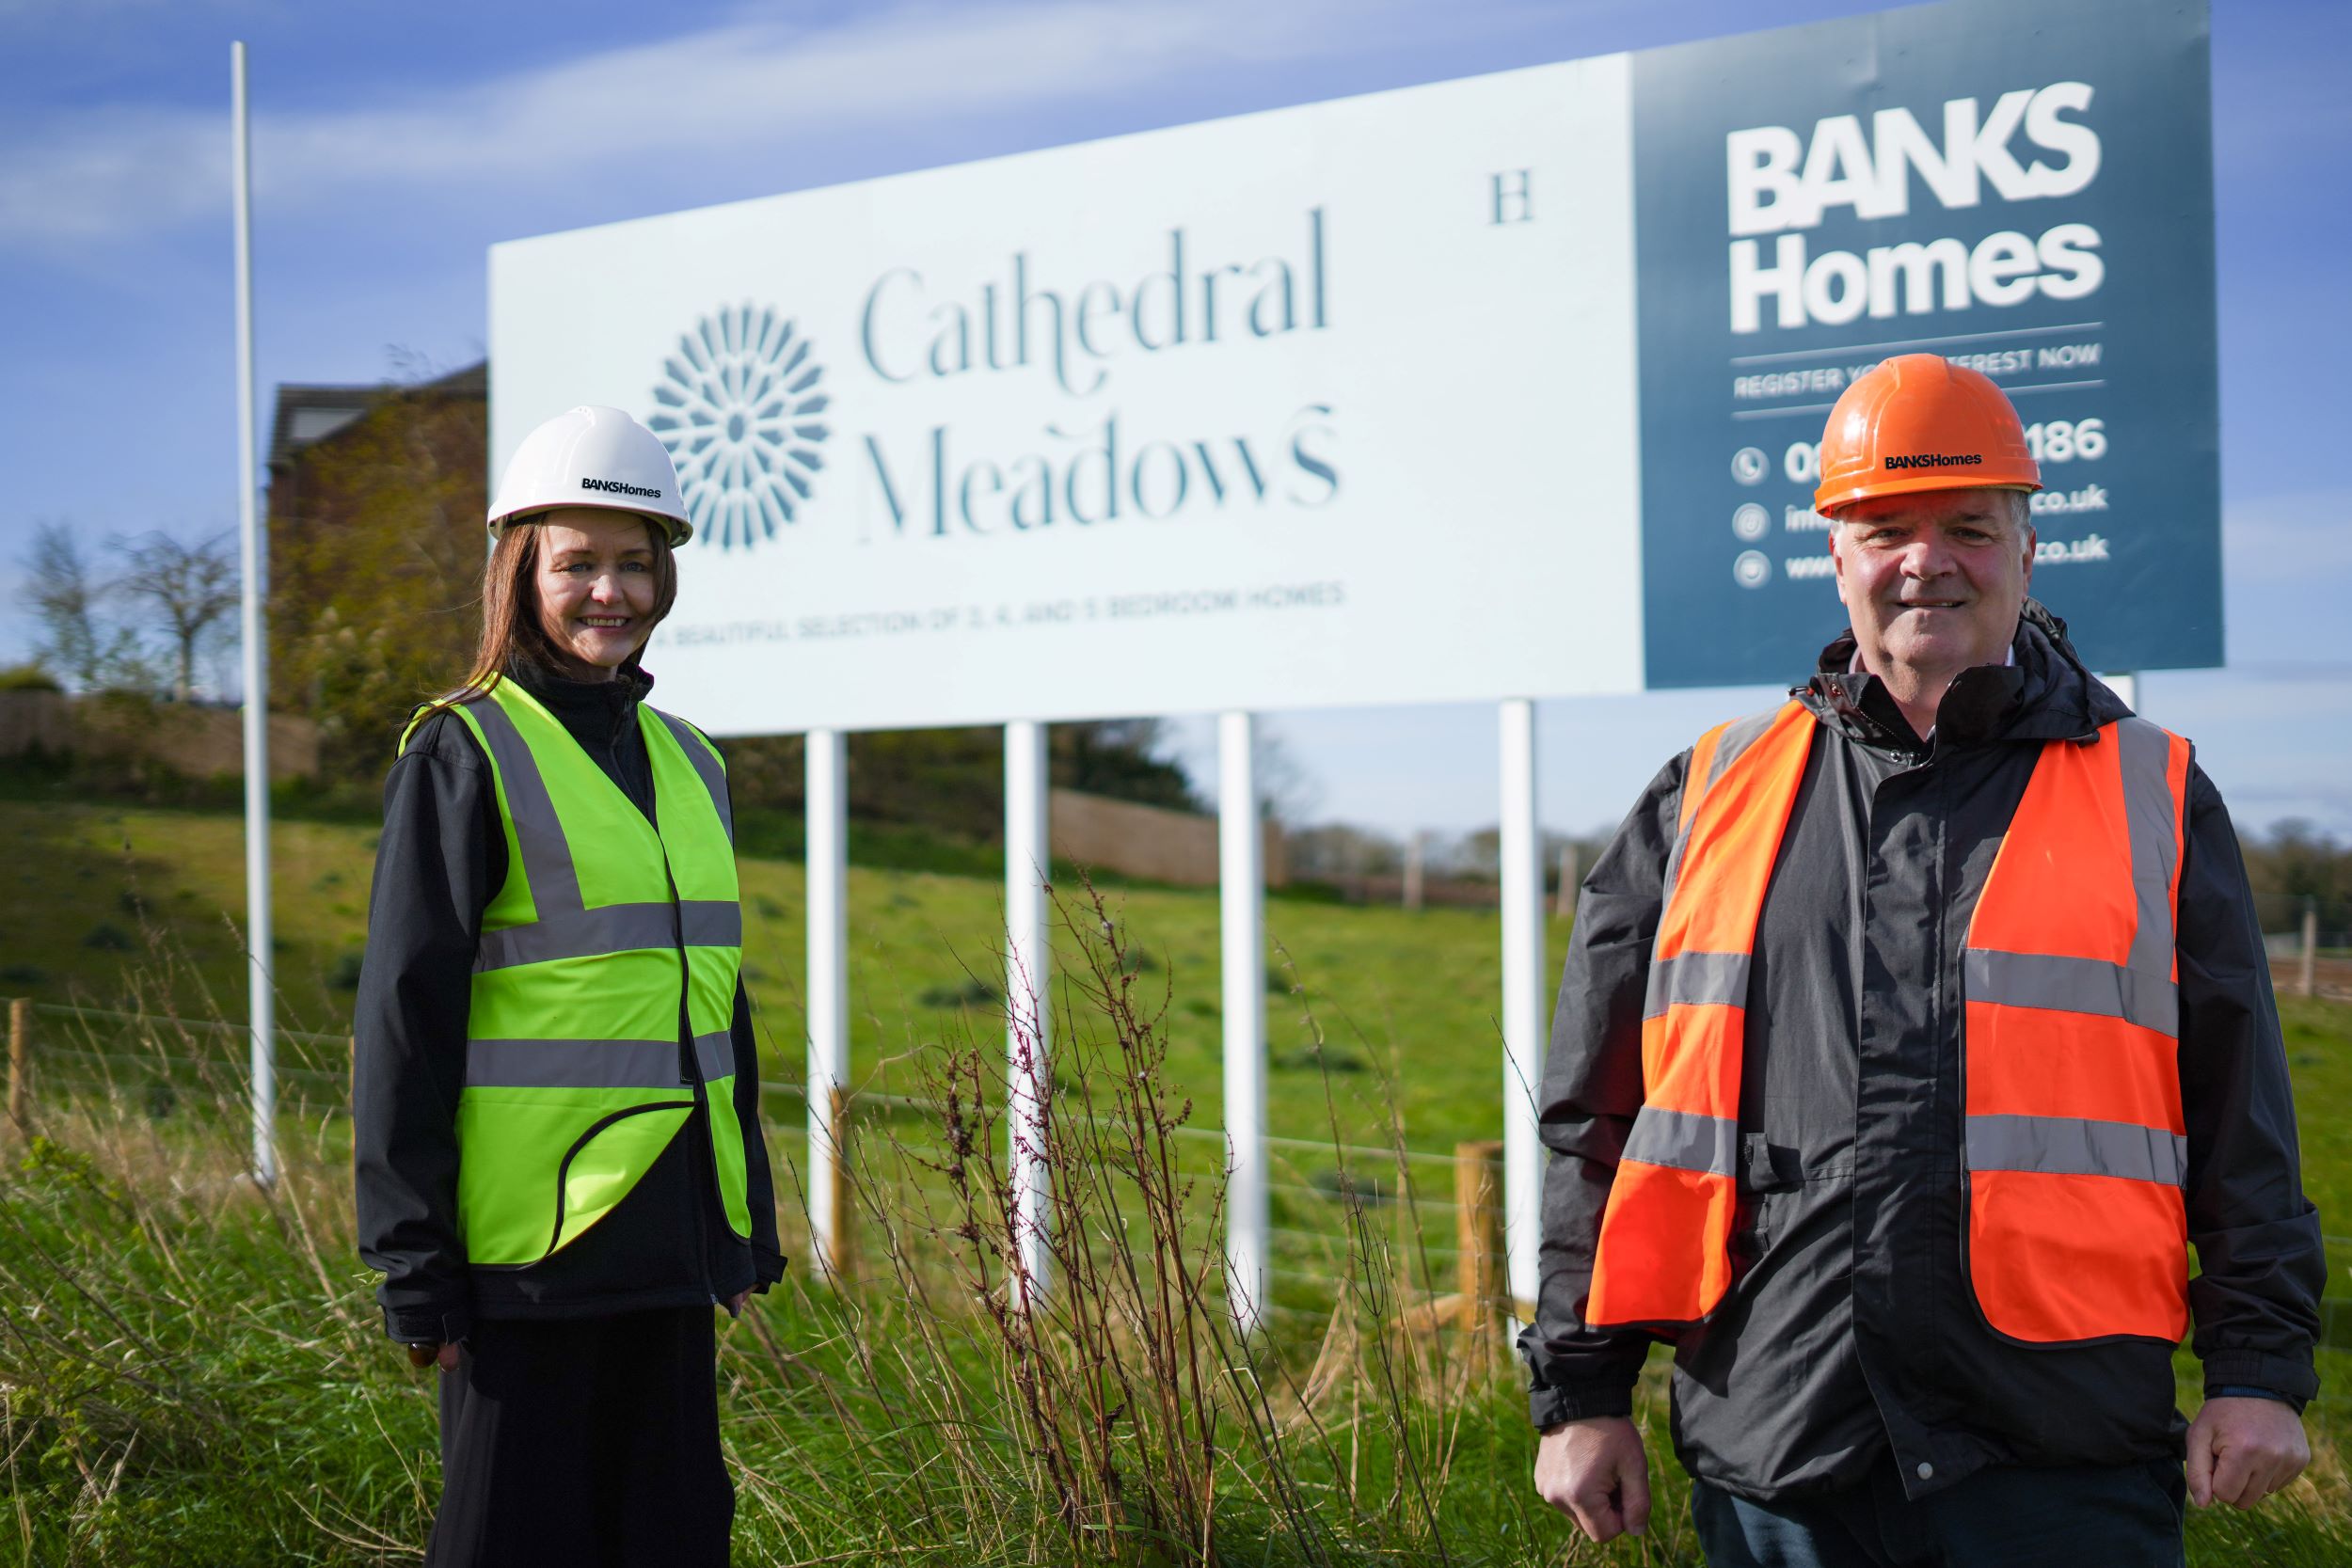 Banks Homes' head of sales and marketing Aisling Ramshaw and head of construction Michael Harty at the Cathedral Meadows site in West Rainton